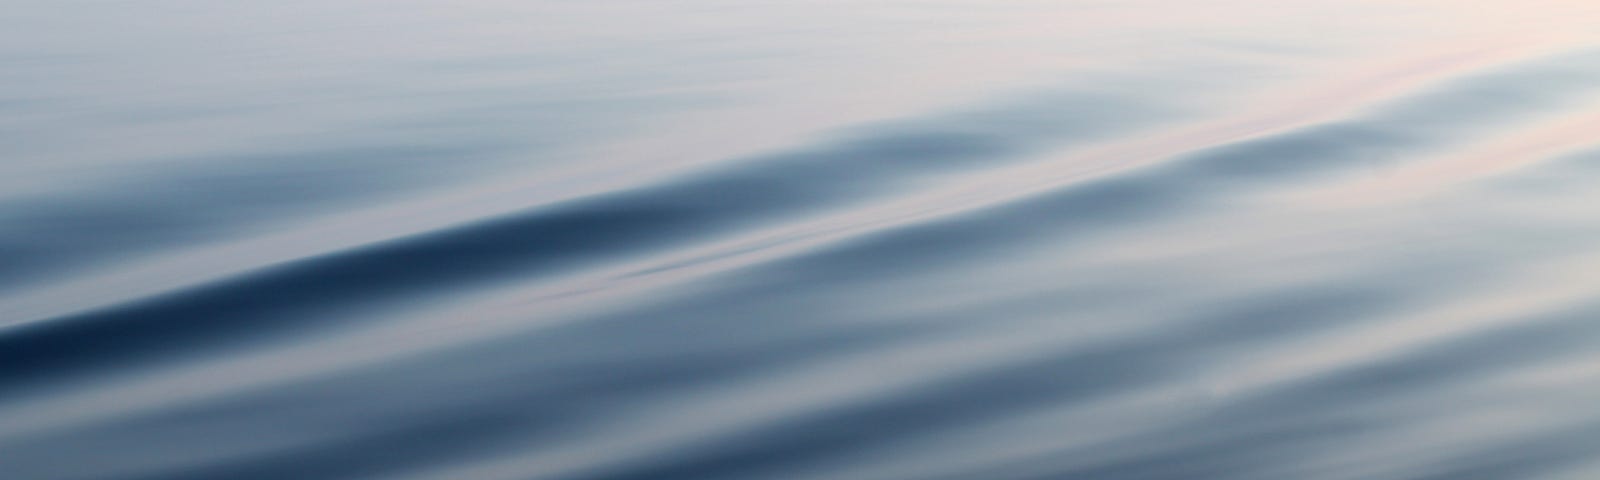 A body of calm water with a light ripple